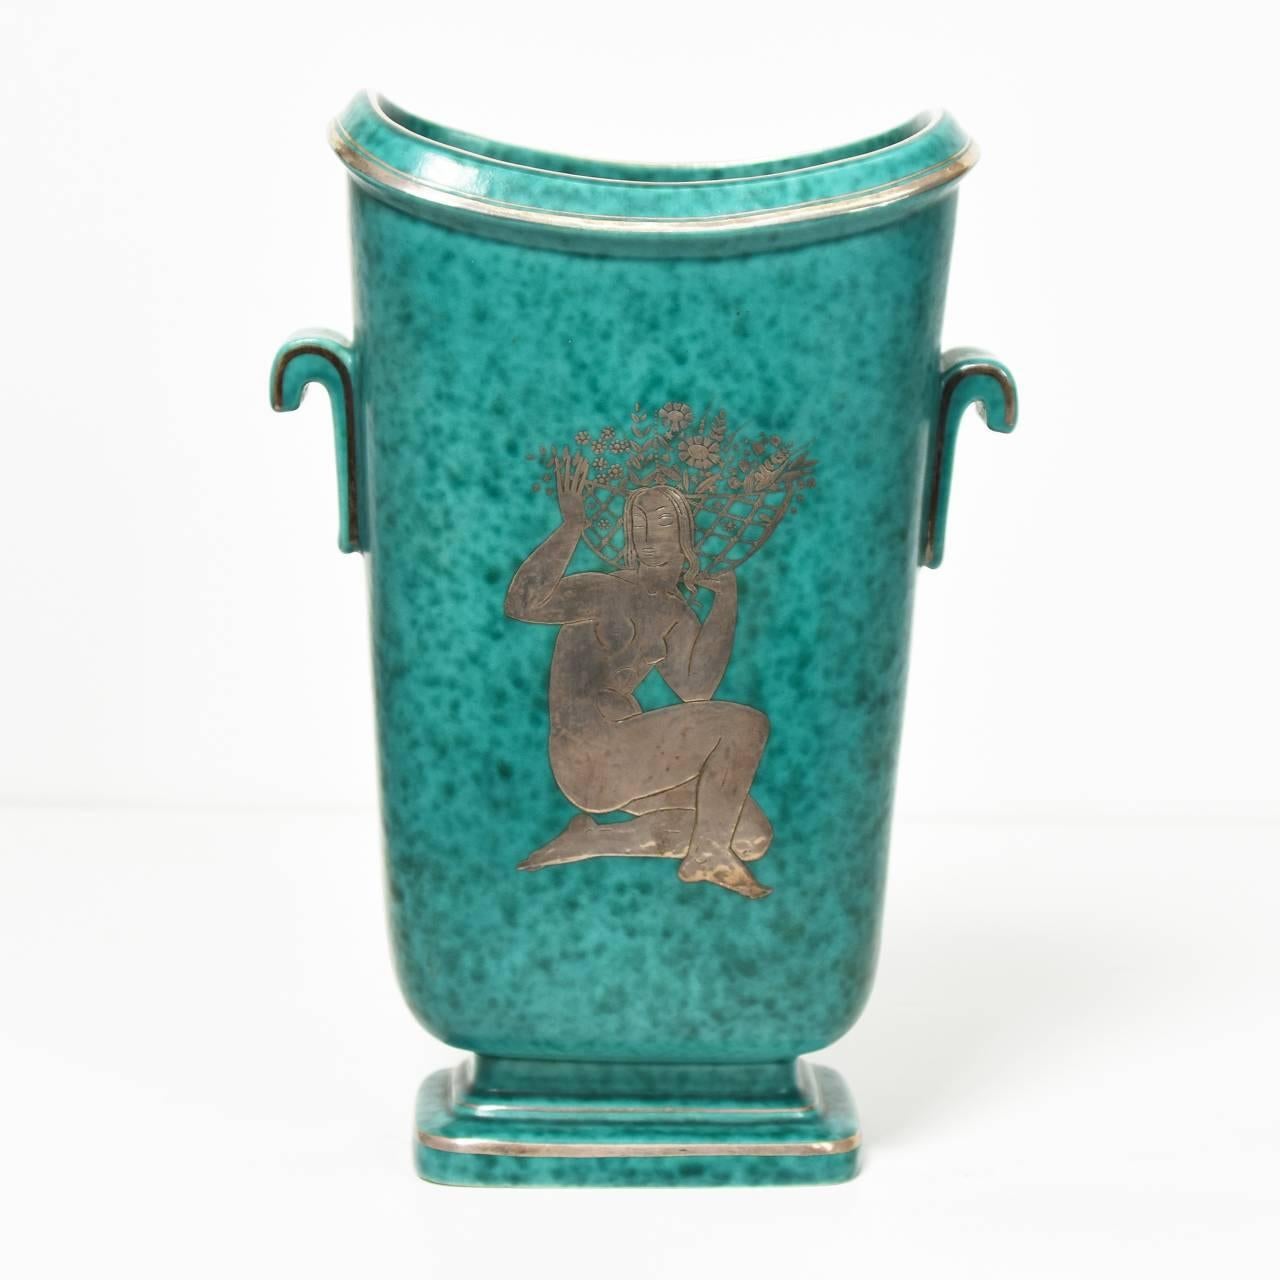 Swedish Art Deco ceramic vase by Gustavsberg with a central silver motif of a kneeling woman bearing a panier of flowers on a sea-green background.
Inscribed to base in silver: Made in Sweden or Gustavsberg /
Argenta / 1209 /BA.